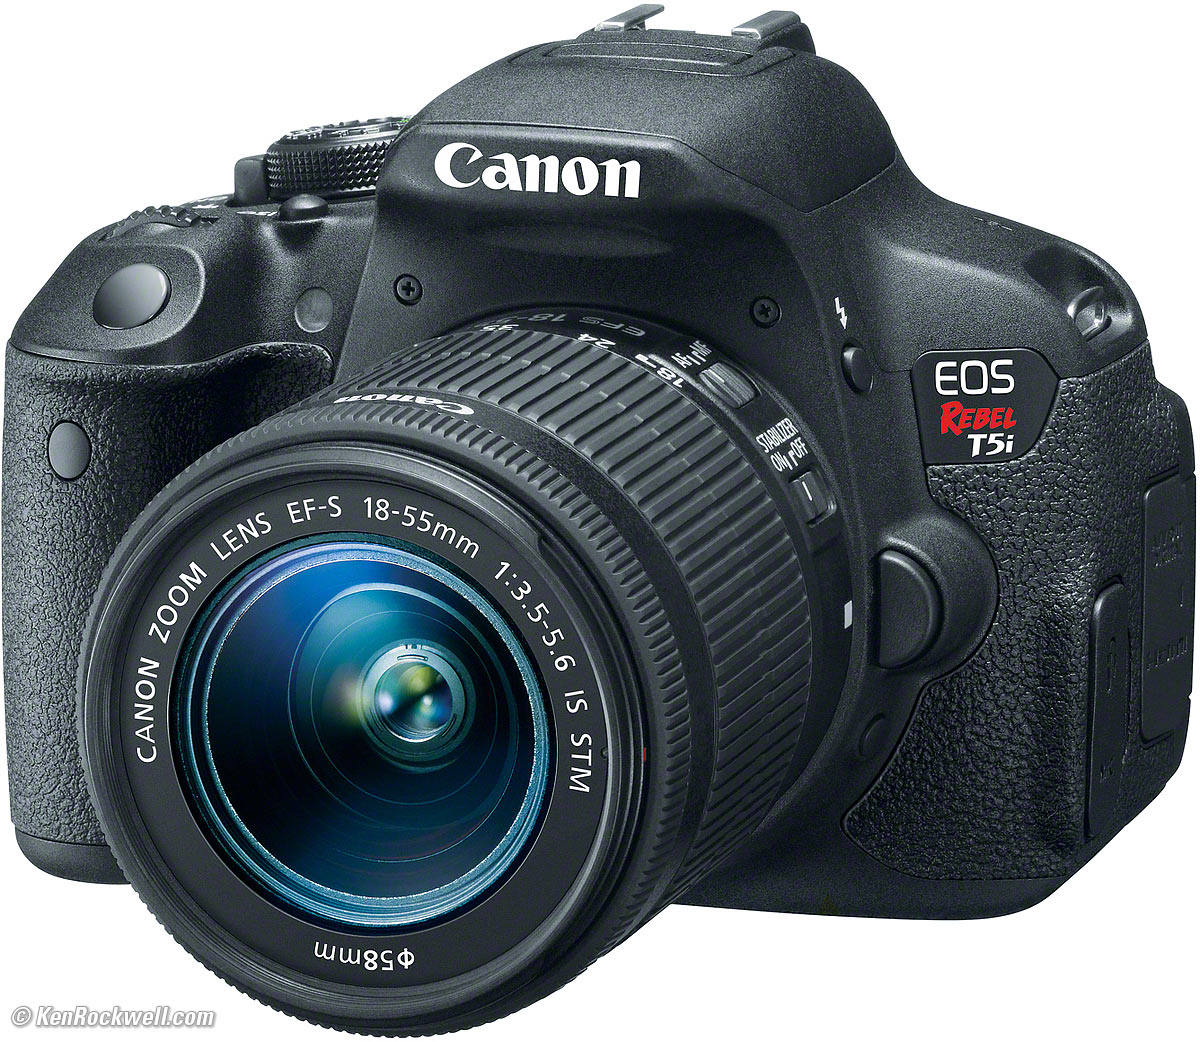 The Canon Digital Rebel T5i seems to be pretty much the same as last ...